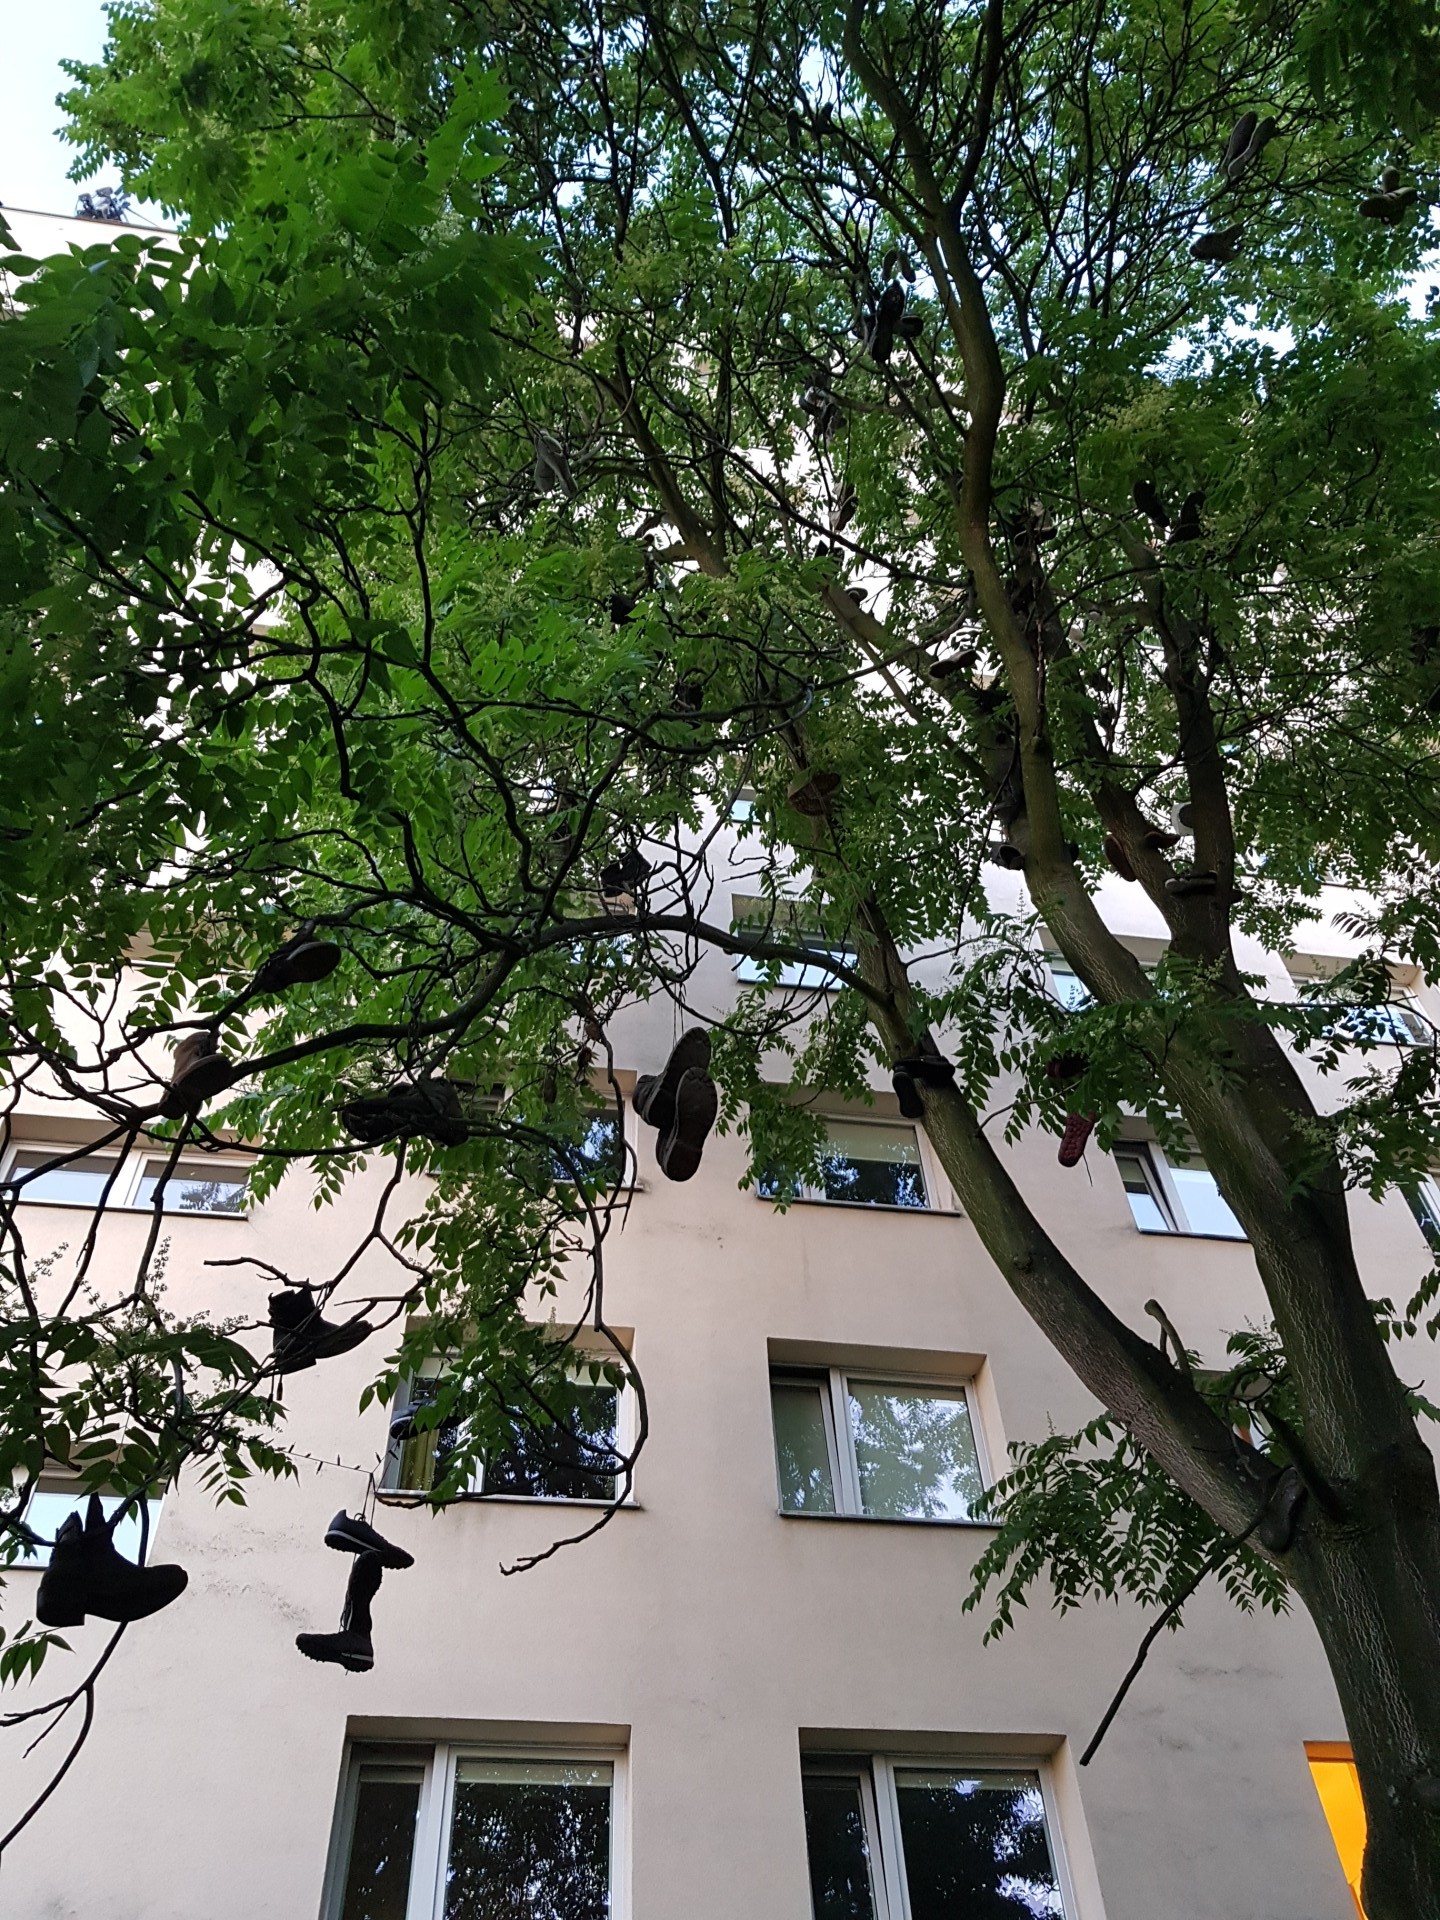 Kraków - shoes on trees O.o - yes, it is possible - Agricultural University of Kraków